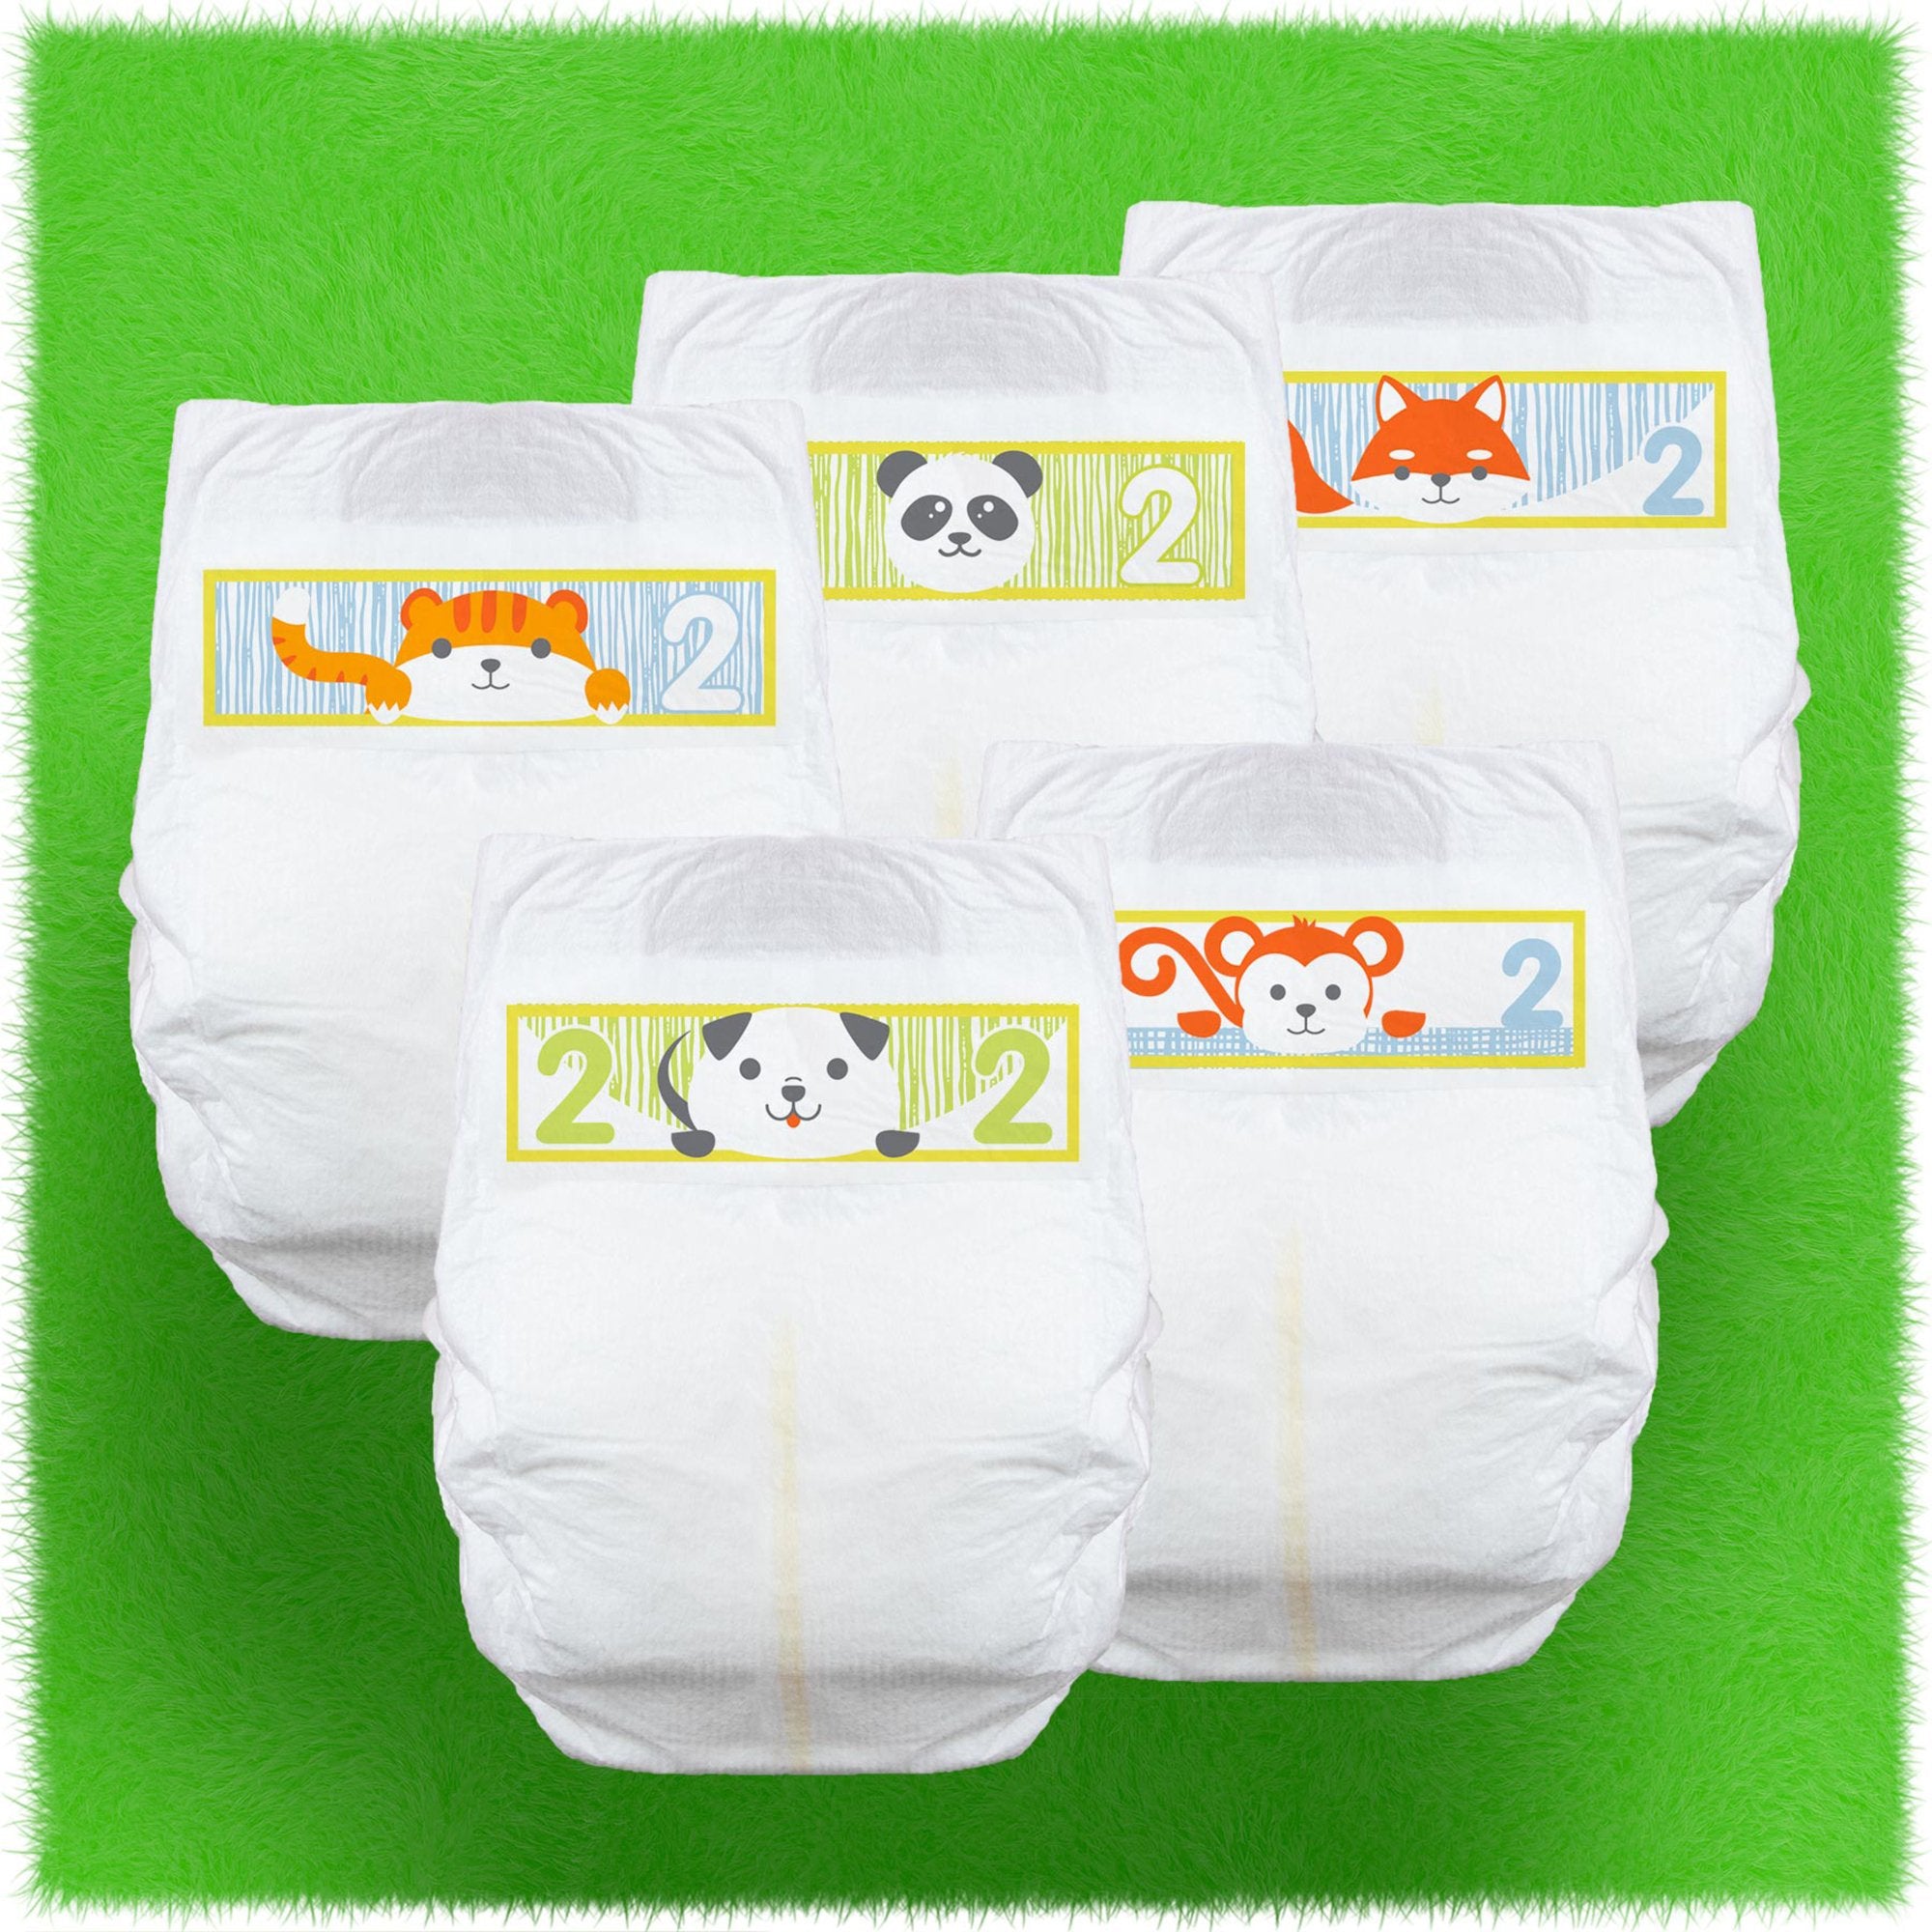 Unisex Baby Diaper Cuties Size 2 Disposable Heavy Absorbency